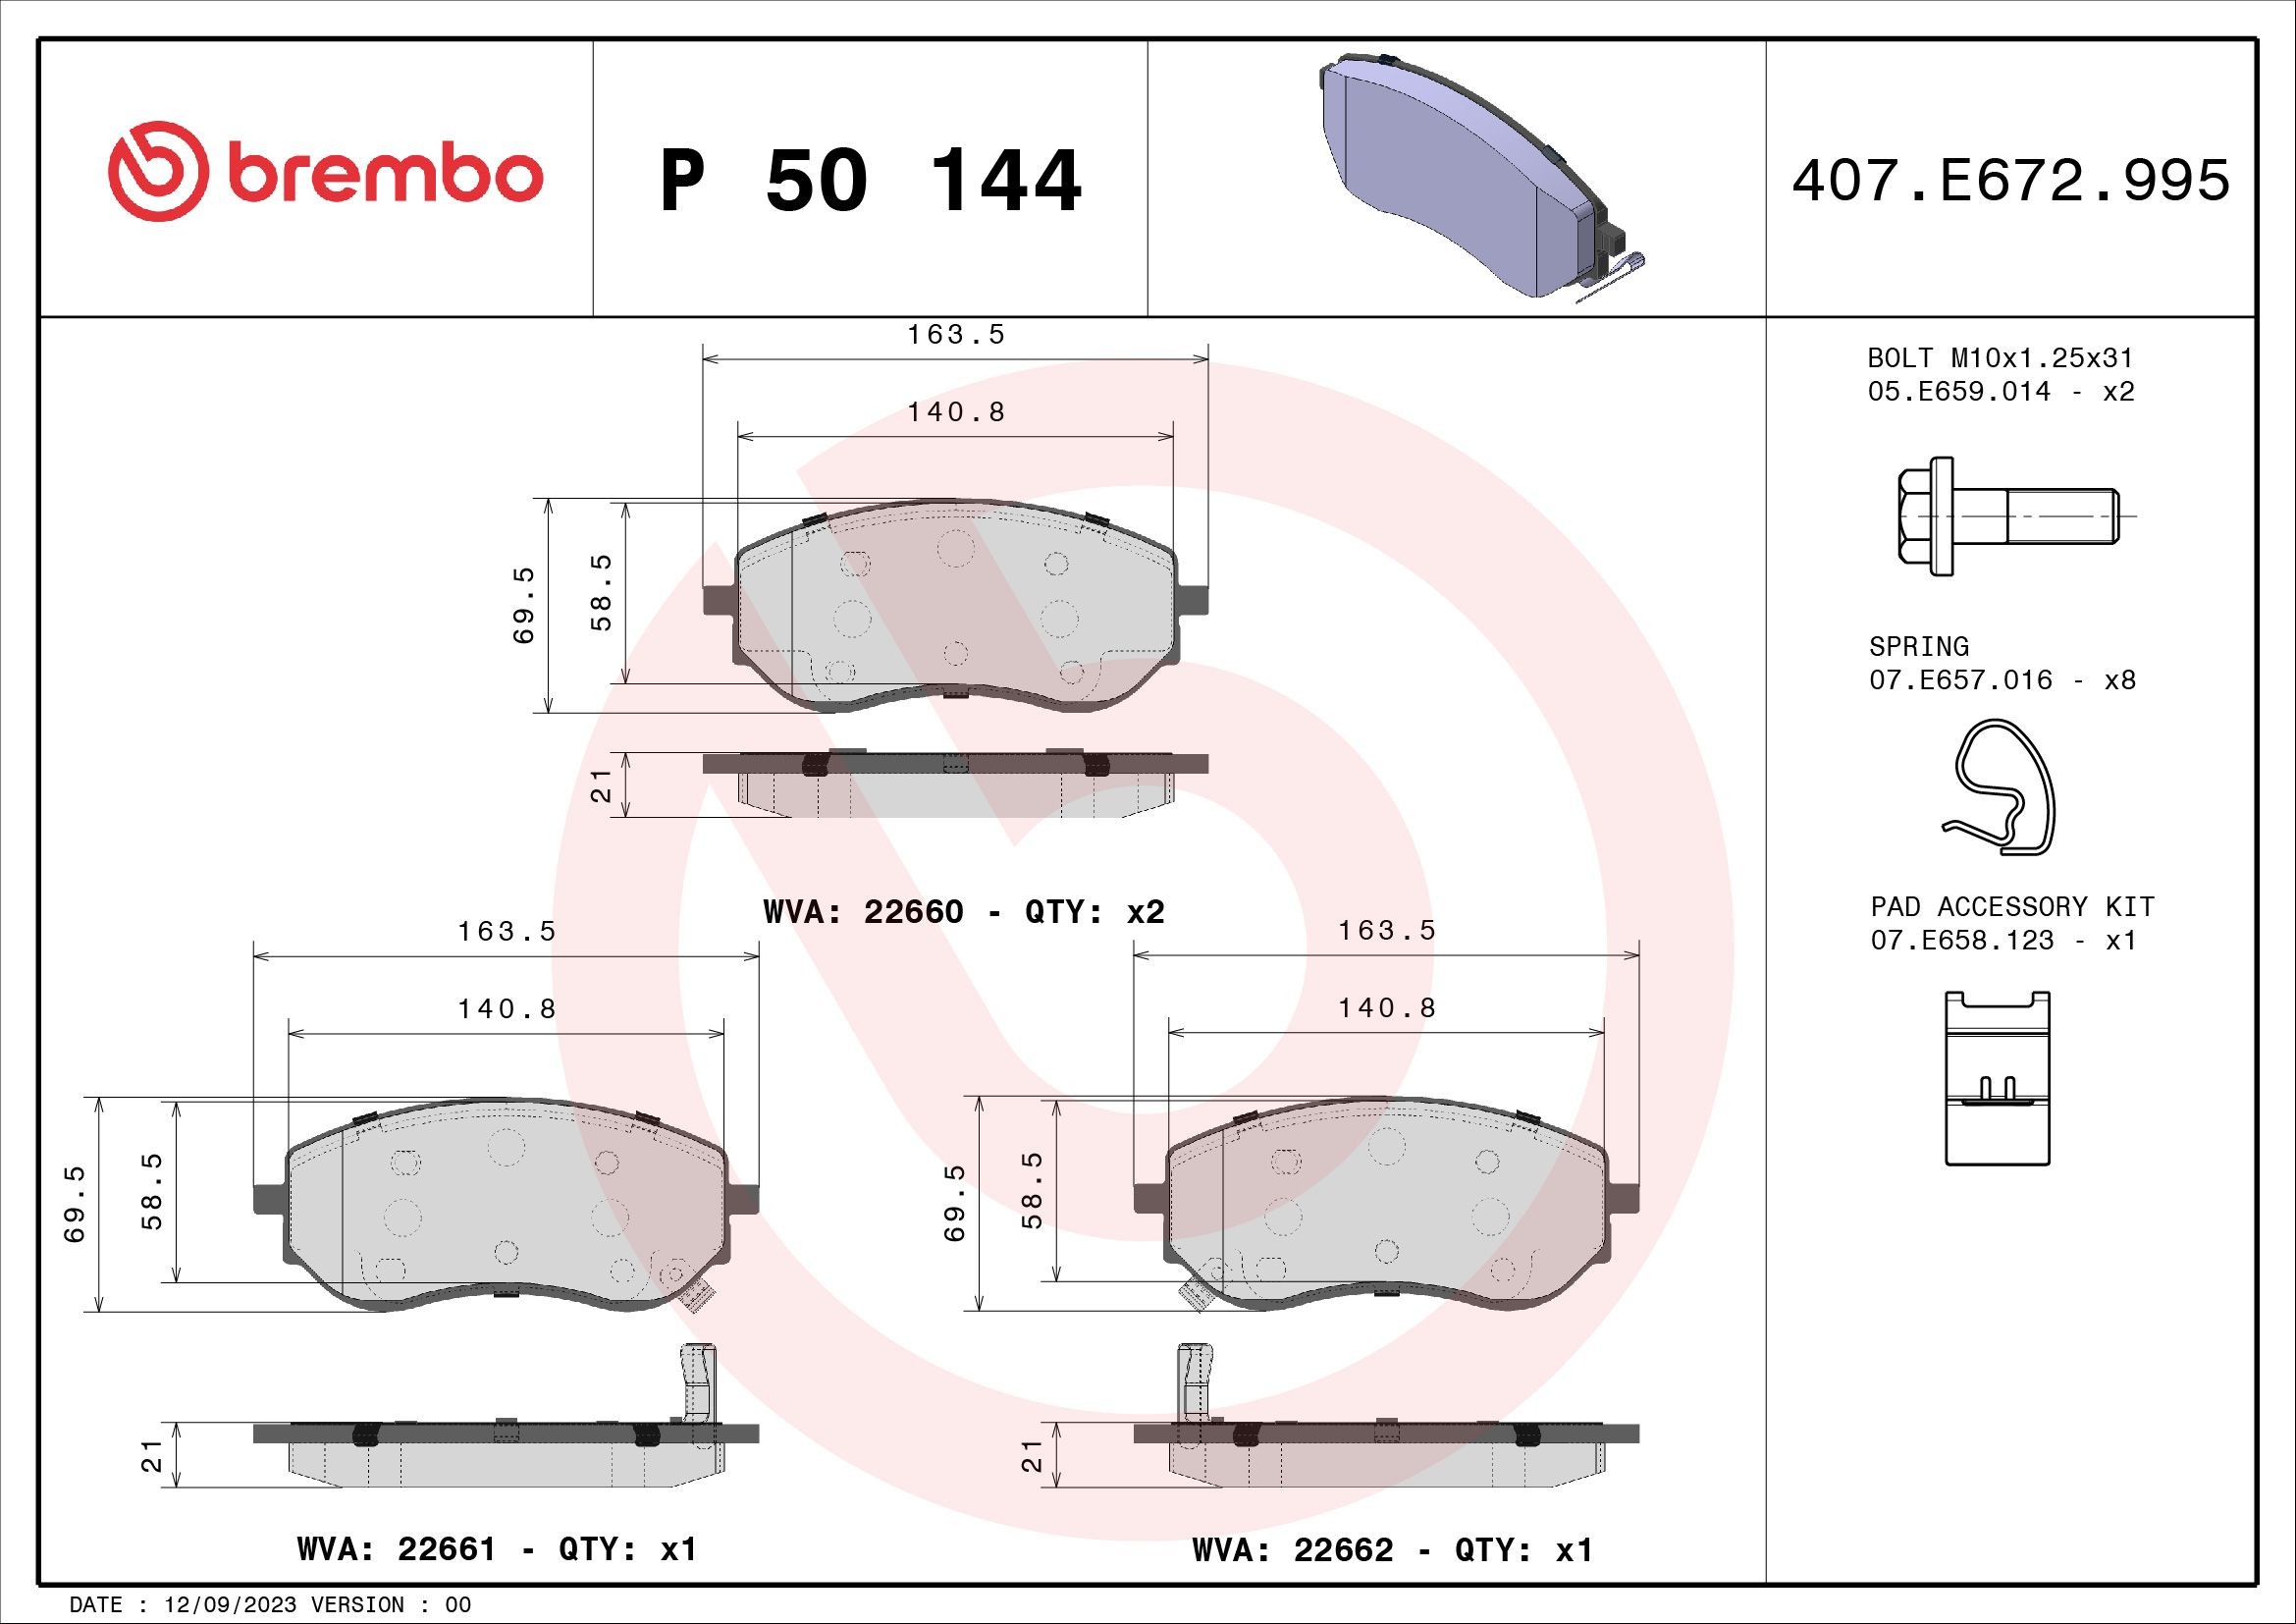 BREMBO P 50 144 Brake pad set with acoustic wear warning, with brake caliper screws, with accessories